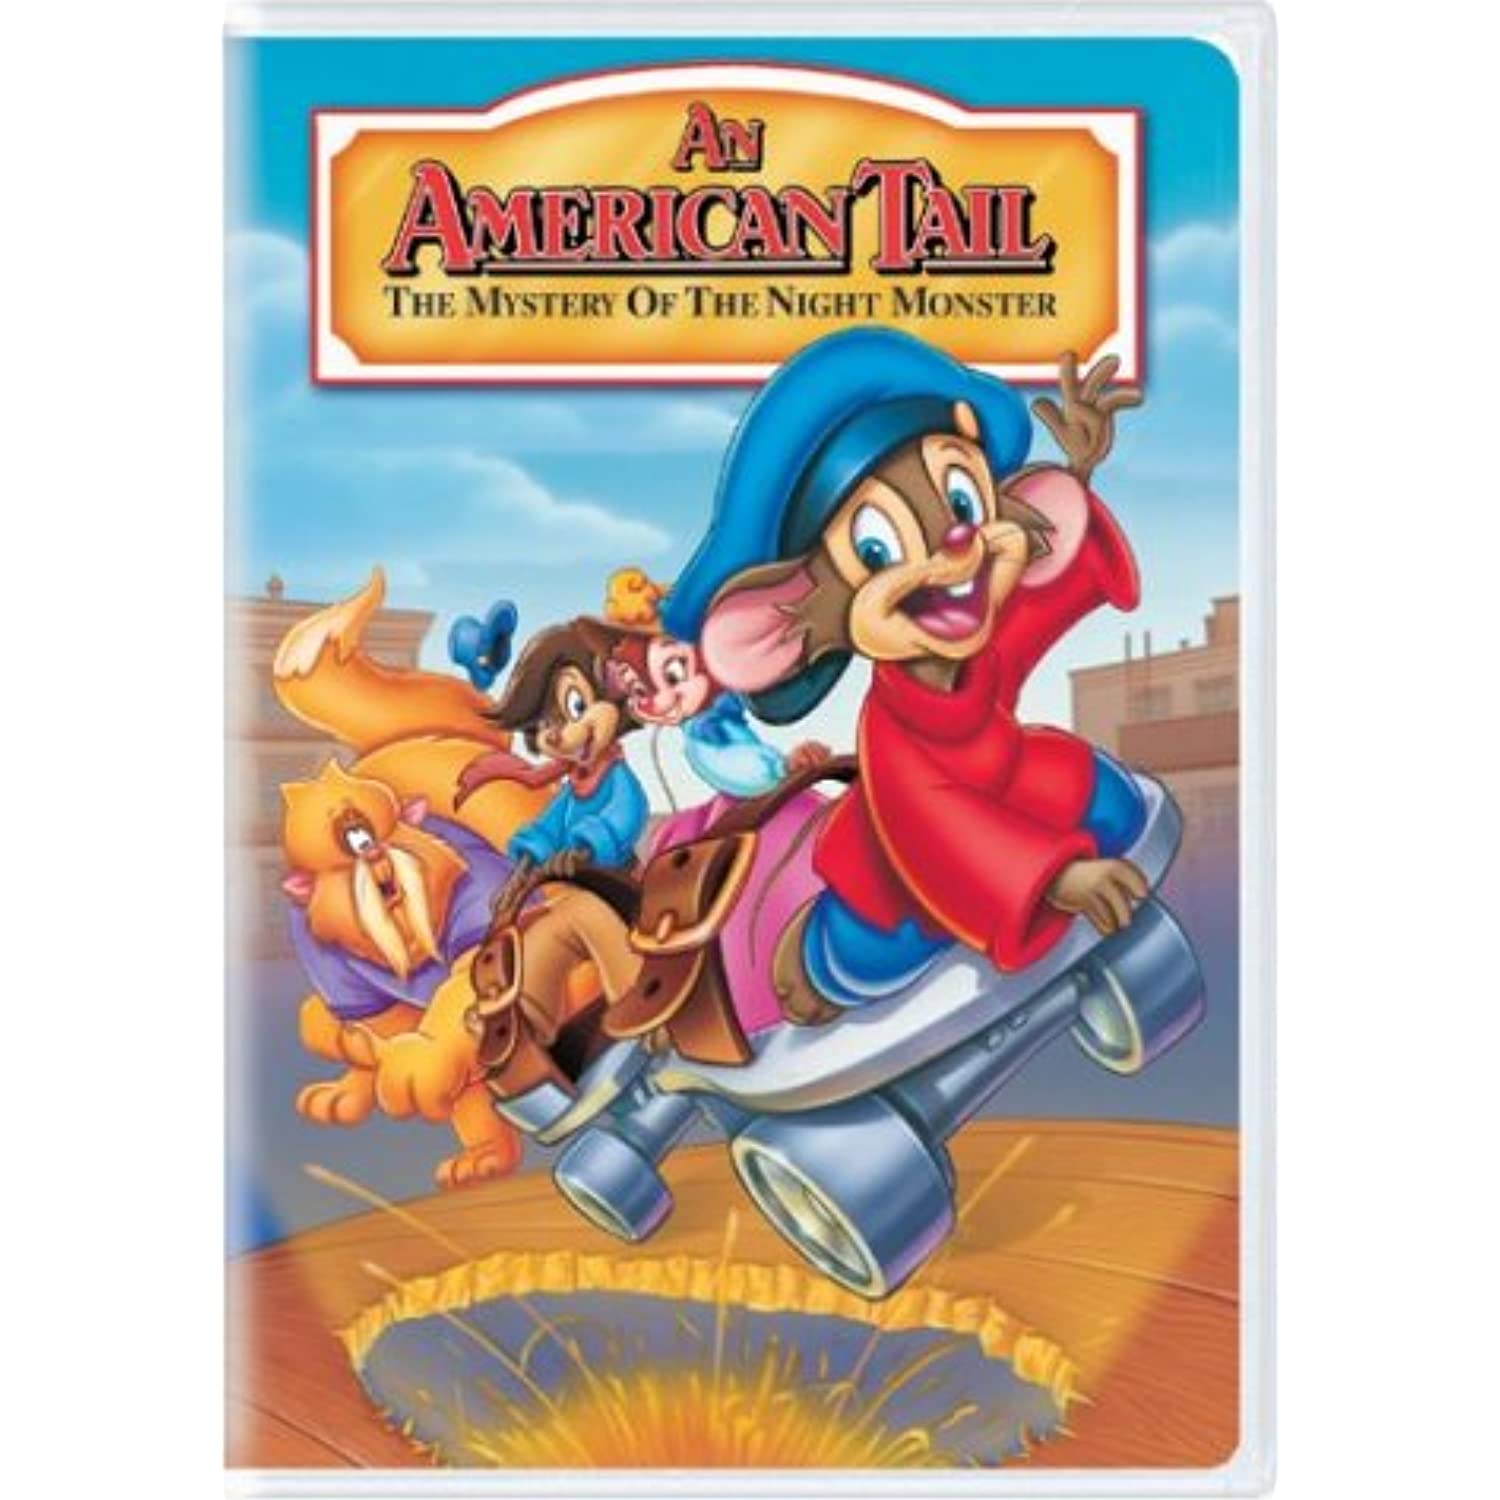 An American Tail The Mystery of The Night Monster DVD